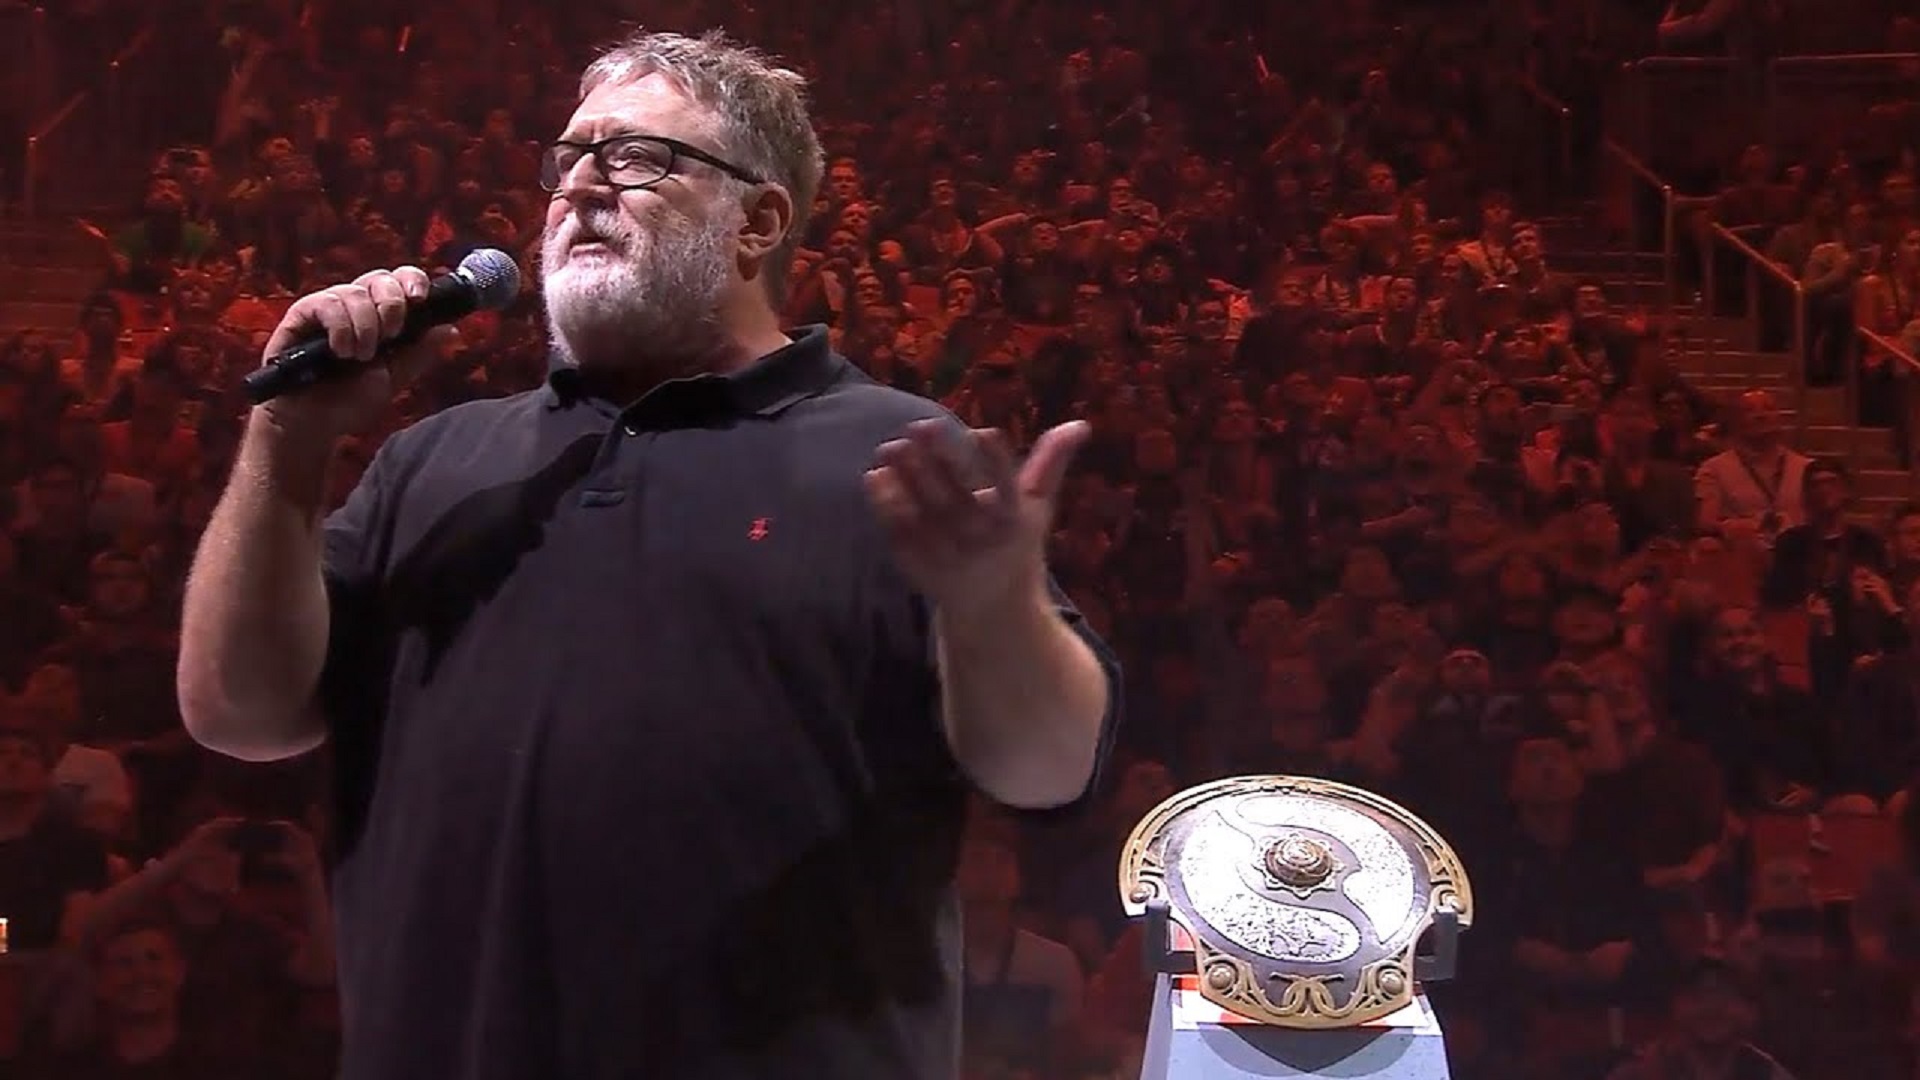 Gabe Newell fires Dota 2 host and production company during live tournament  – Destructoid